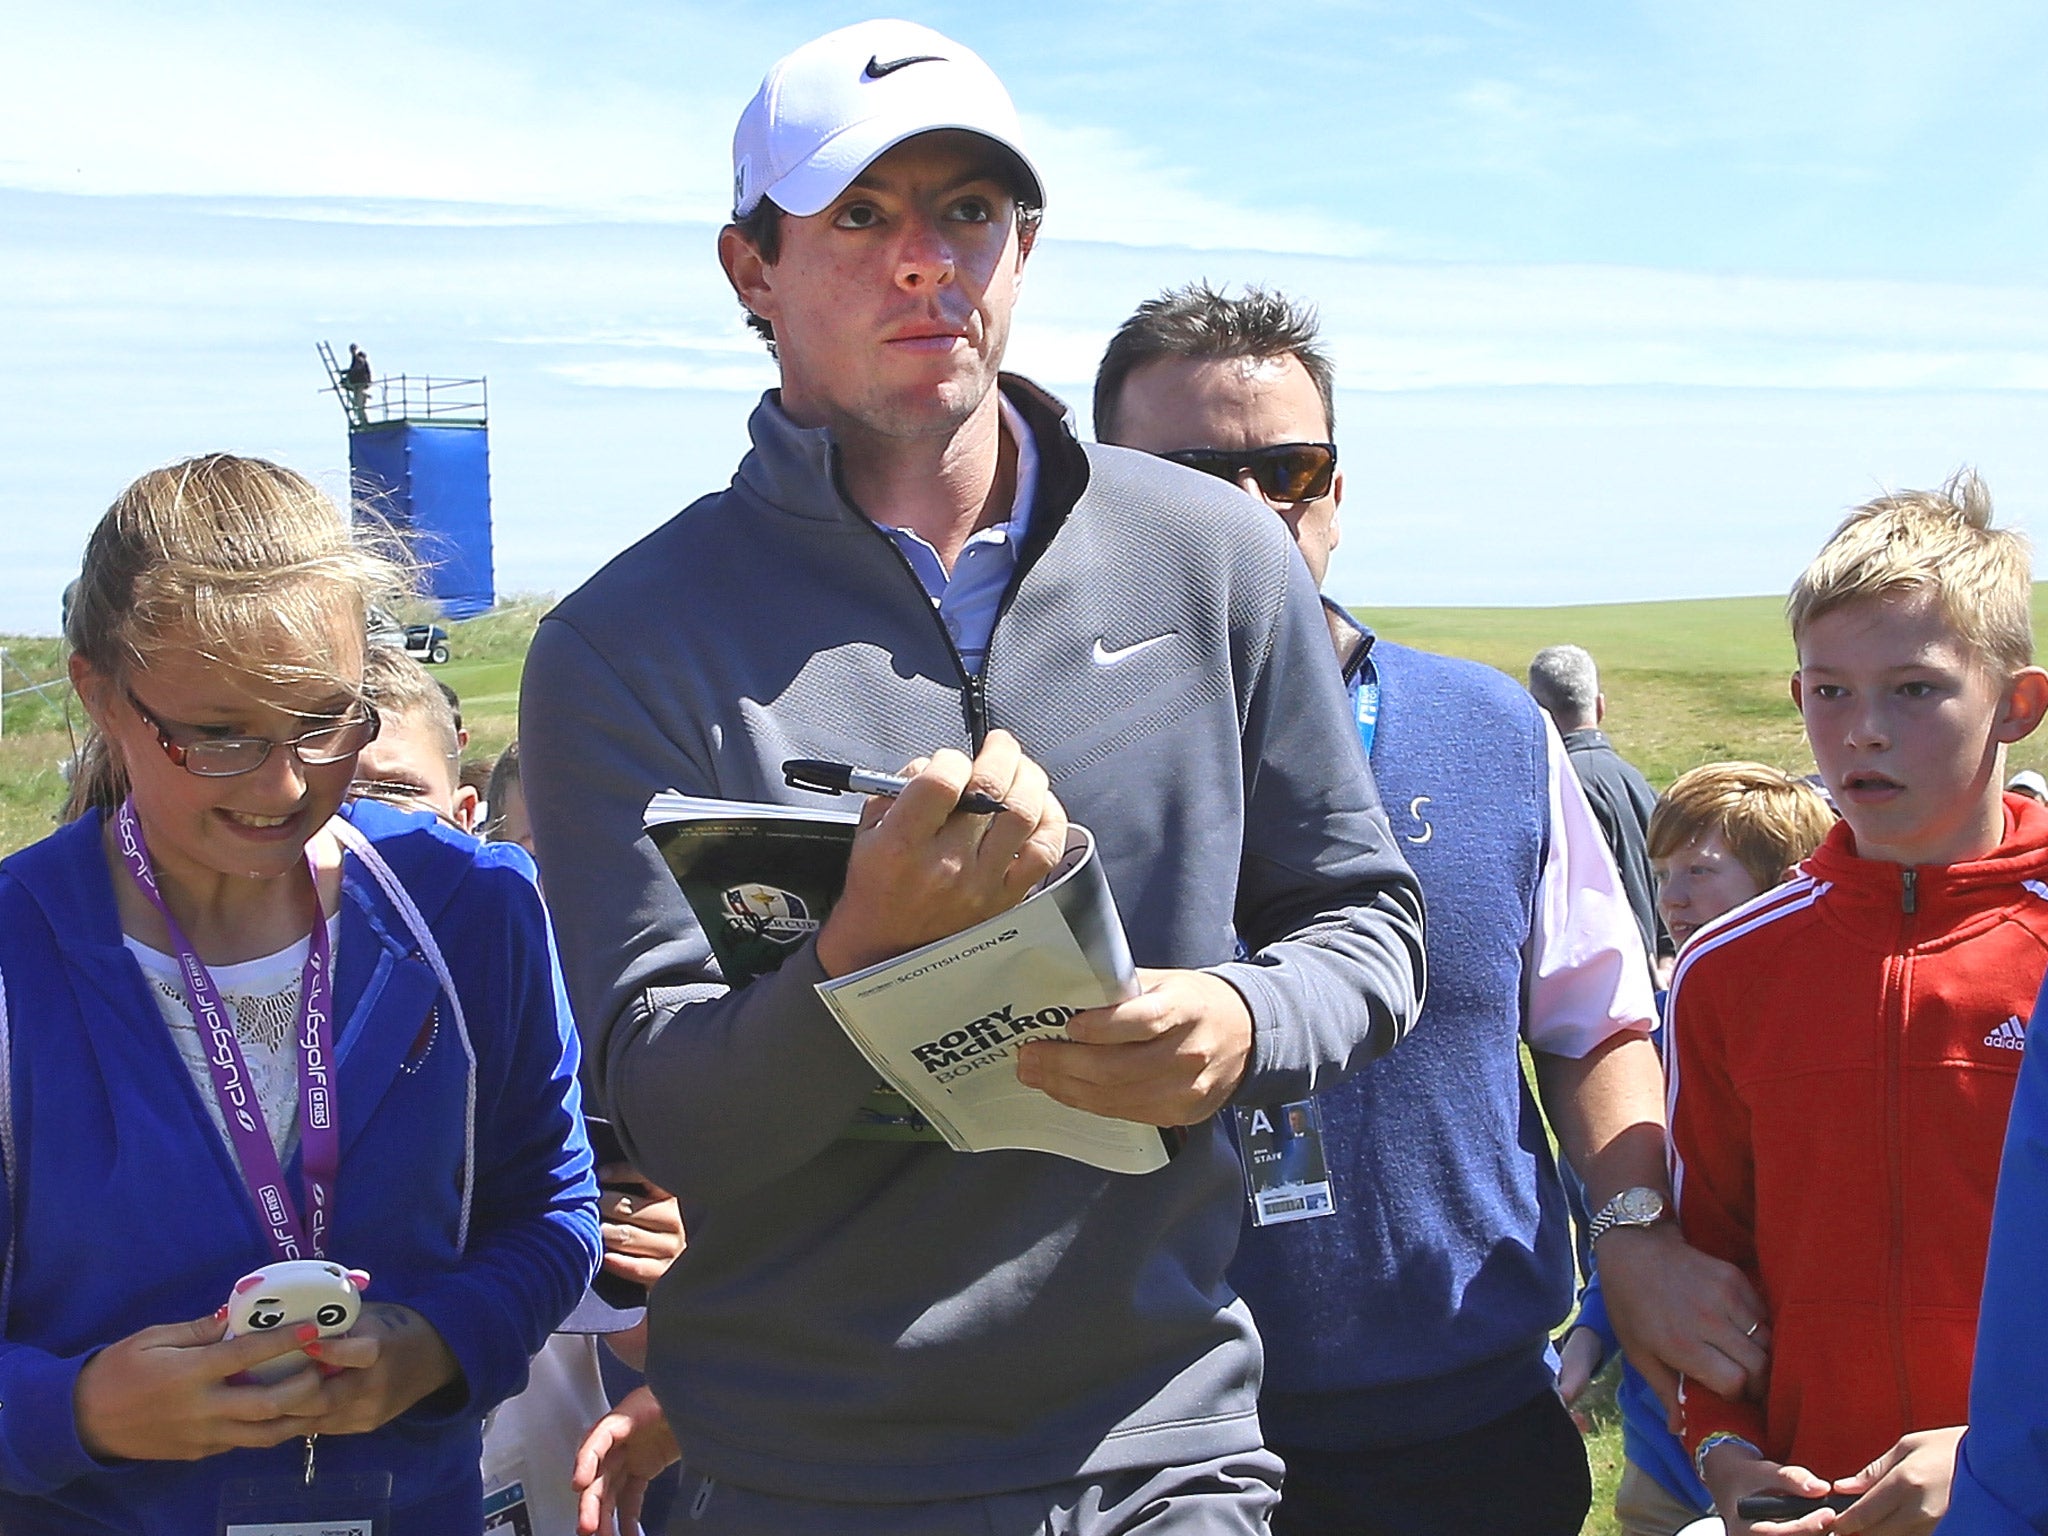 Rory McIlroy signing autographs for supporters